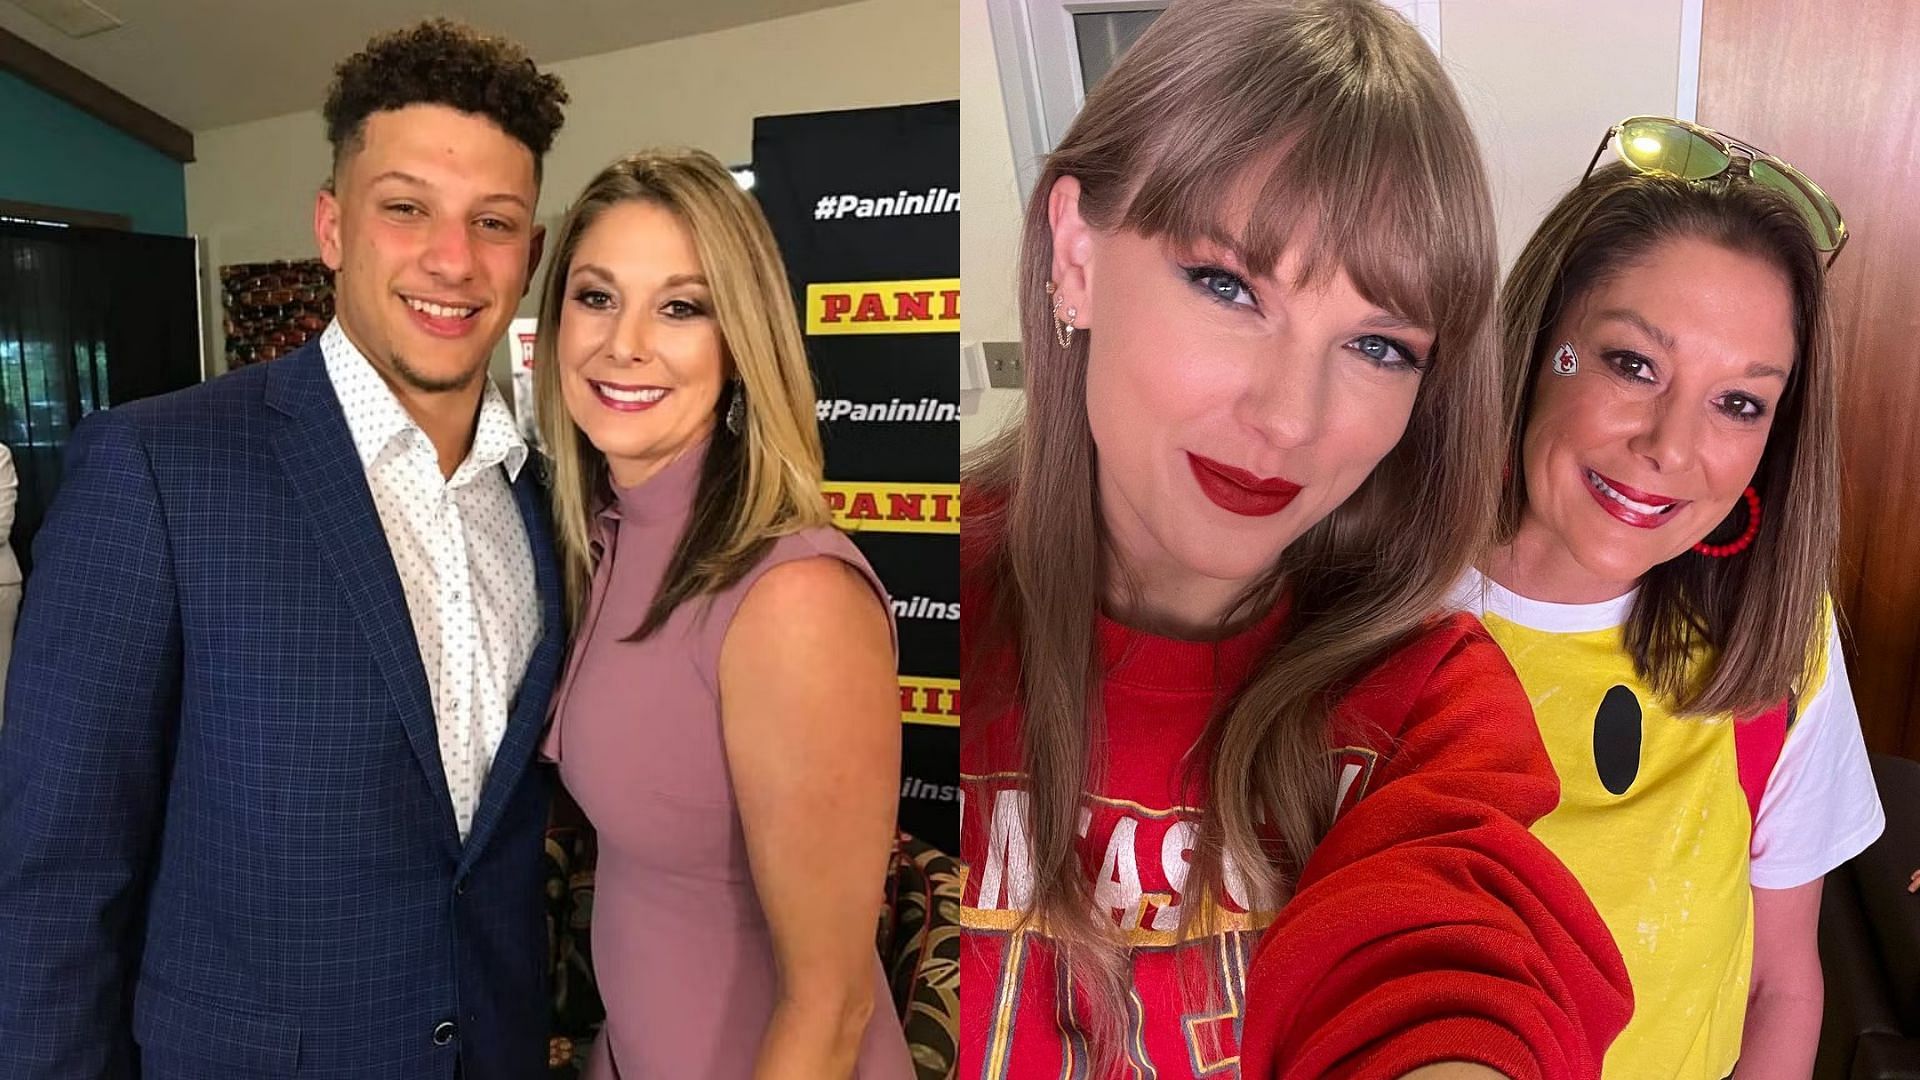 Randi Mahomes surprised her fans after she poses with Taylor Swift.